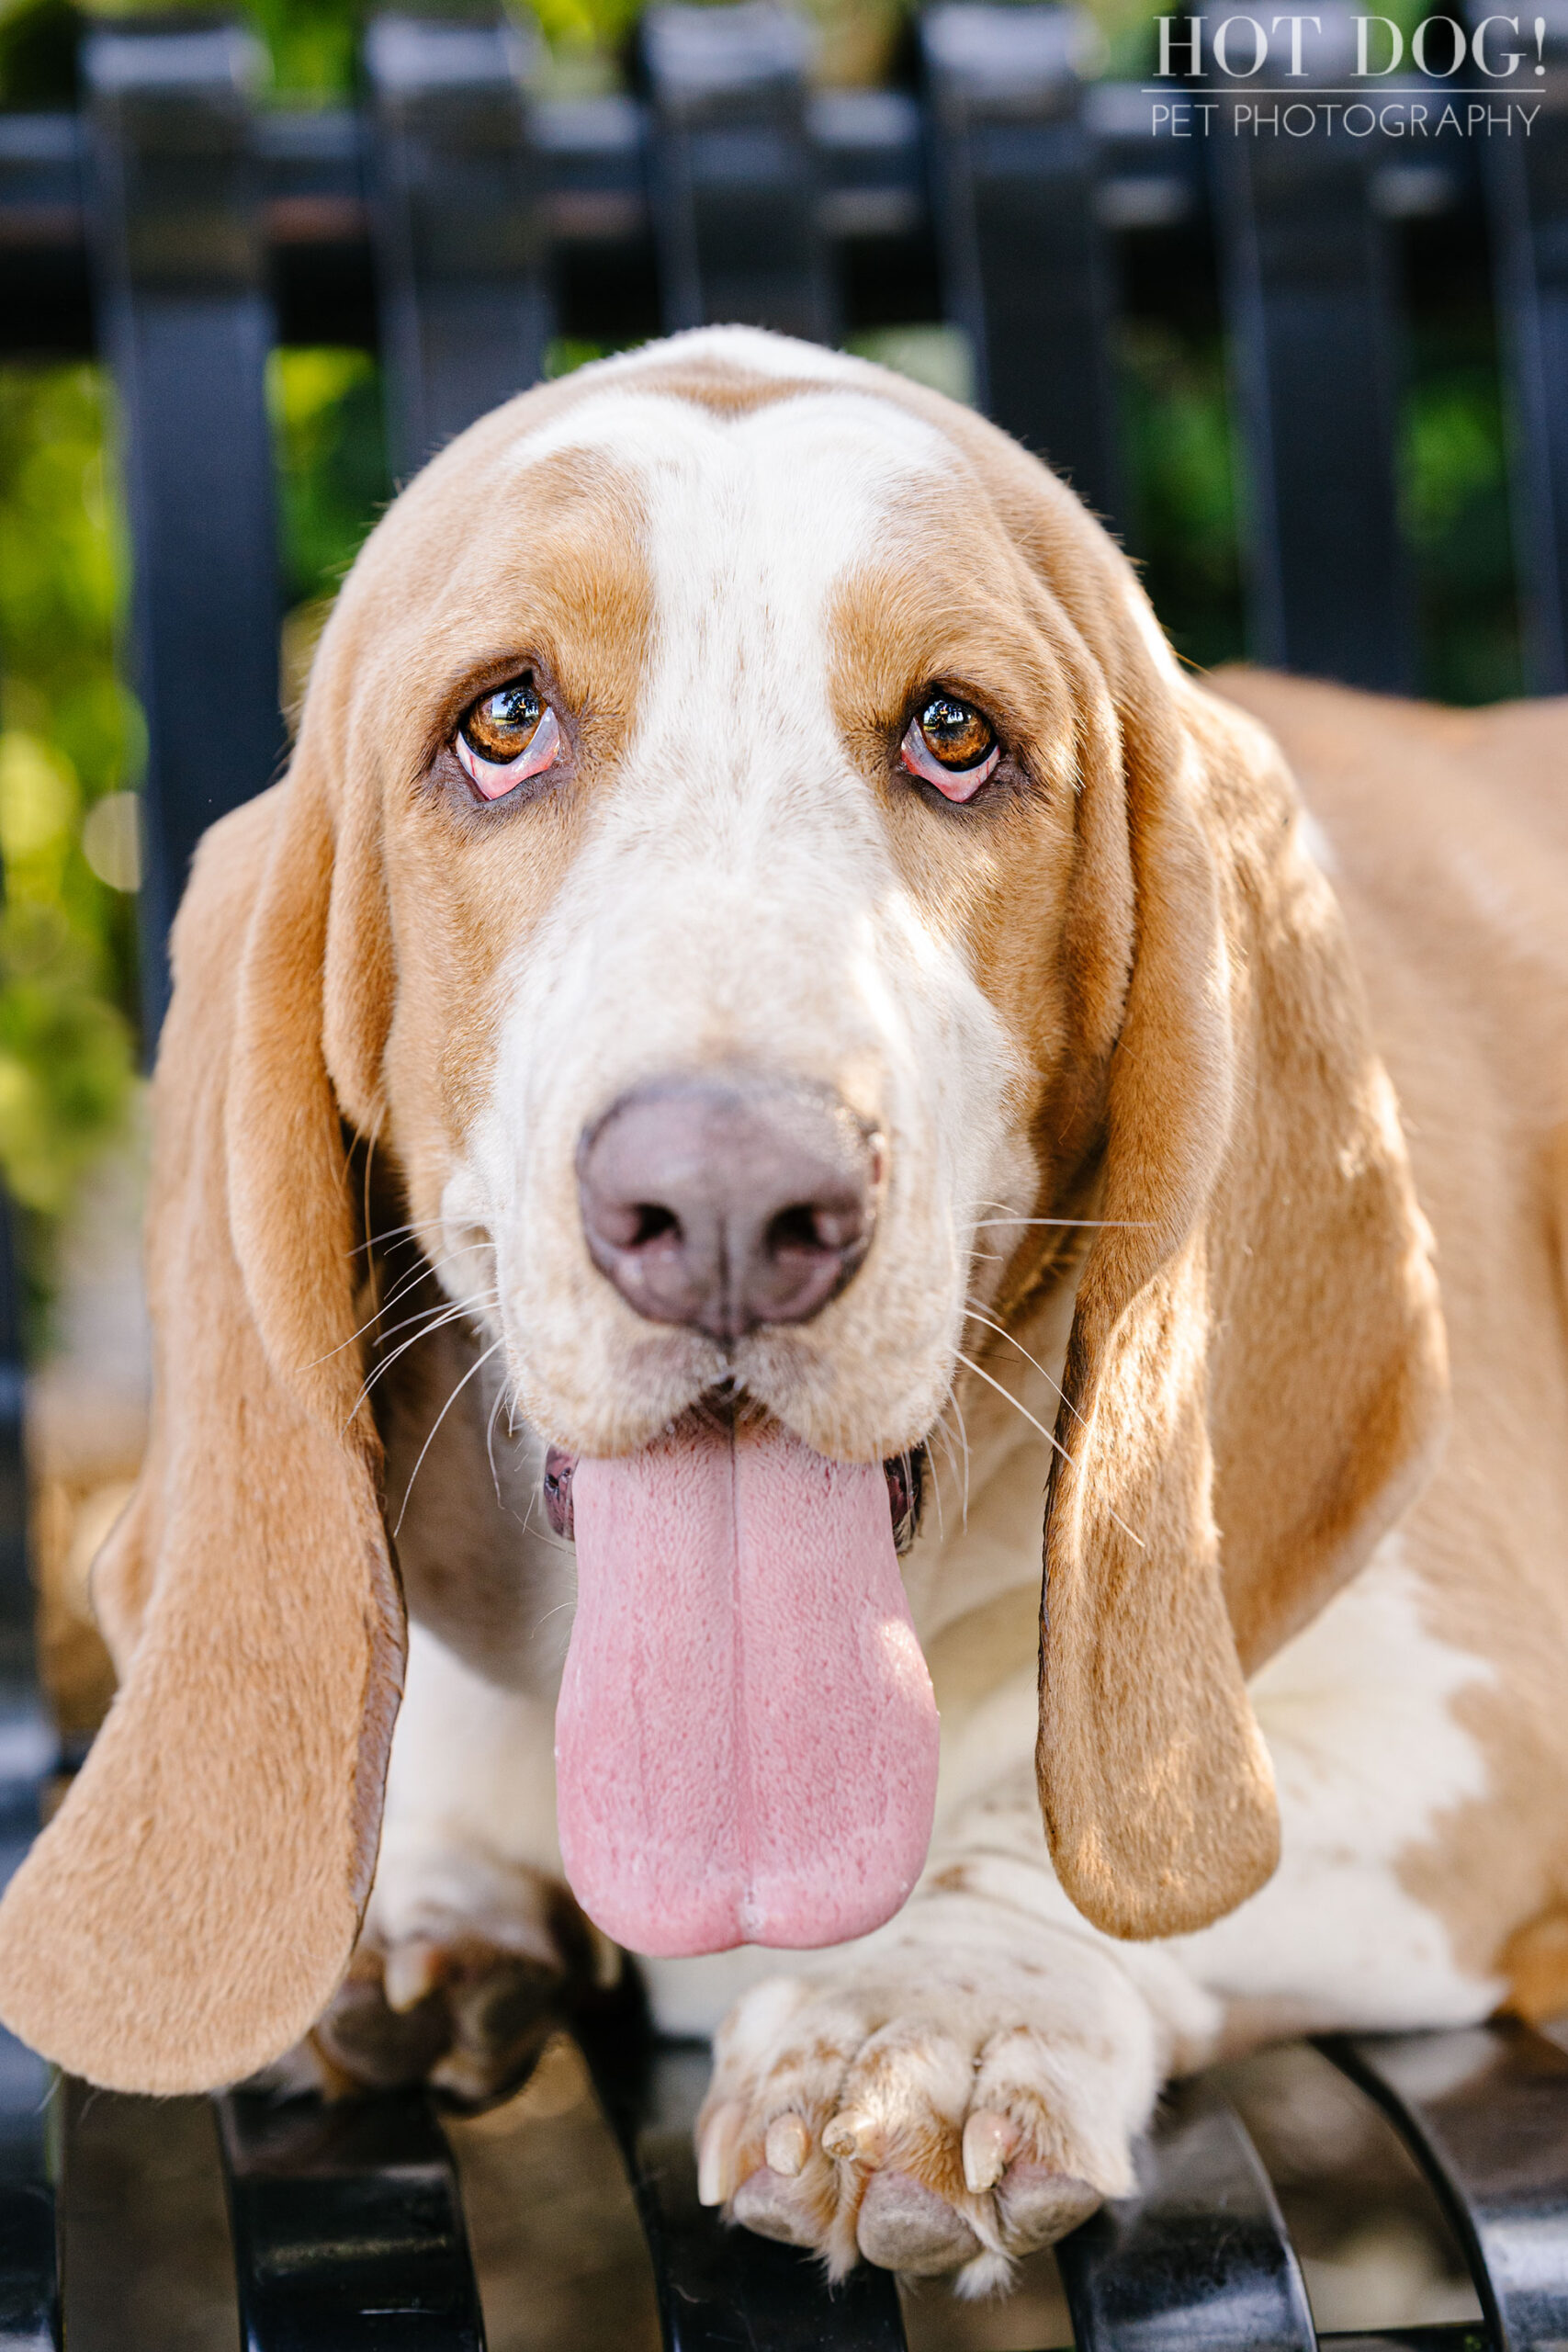 A family of basset hounds are photographed in Orlando, Florida by Tom and Erika Pitera of Hot Dog! Pet Photography.